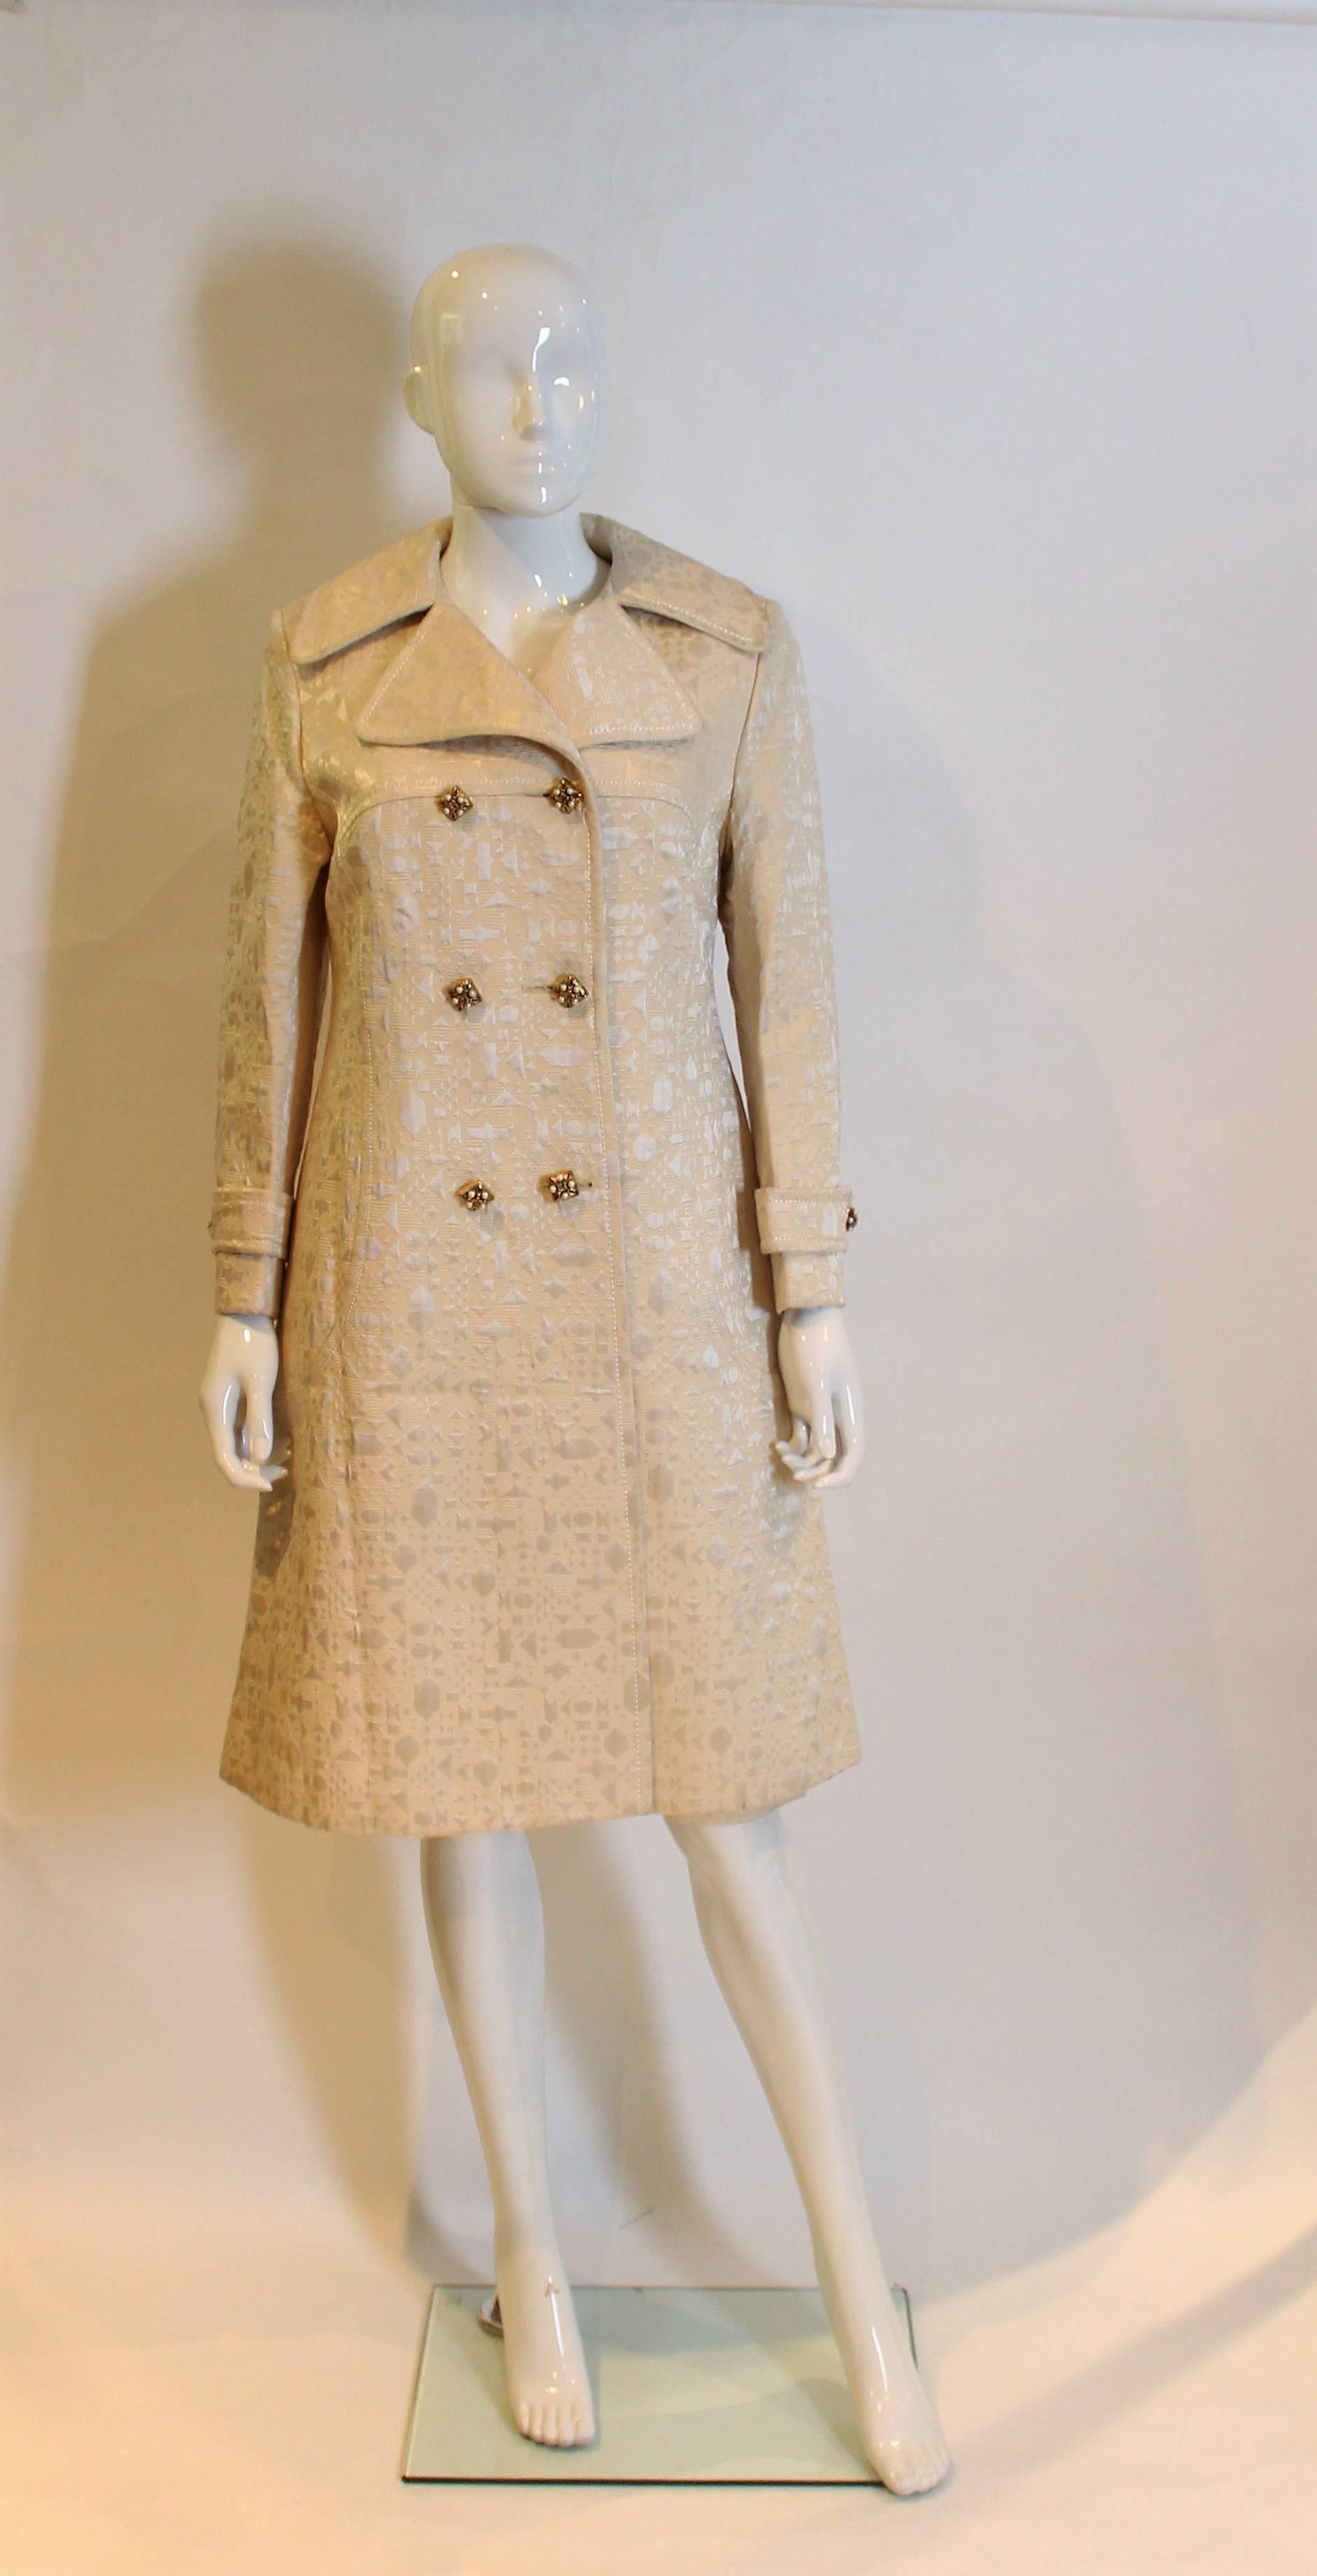 A chic coat by Braucschweig of Switzerland, made for the department store, Browns of Chester. The coat is made of a cream coloured, brocade like fabric with 6 buttons on the front, one on each cuff and a cut away collar.